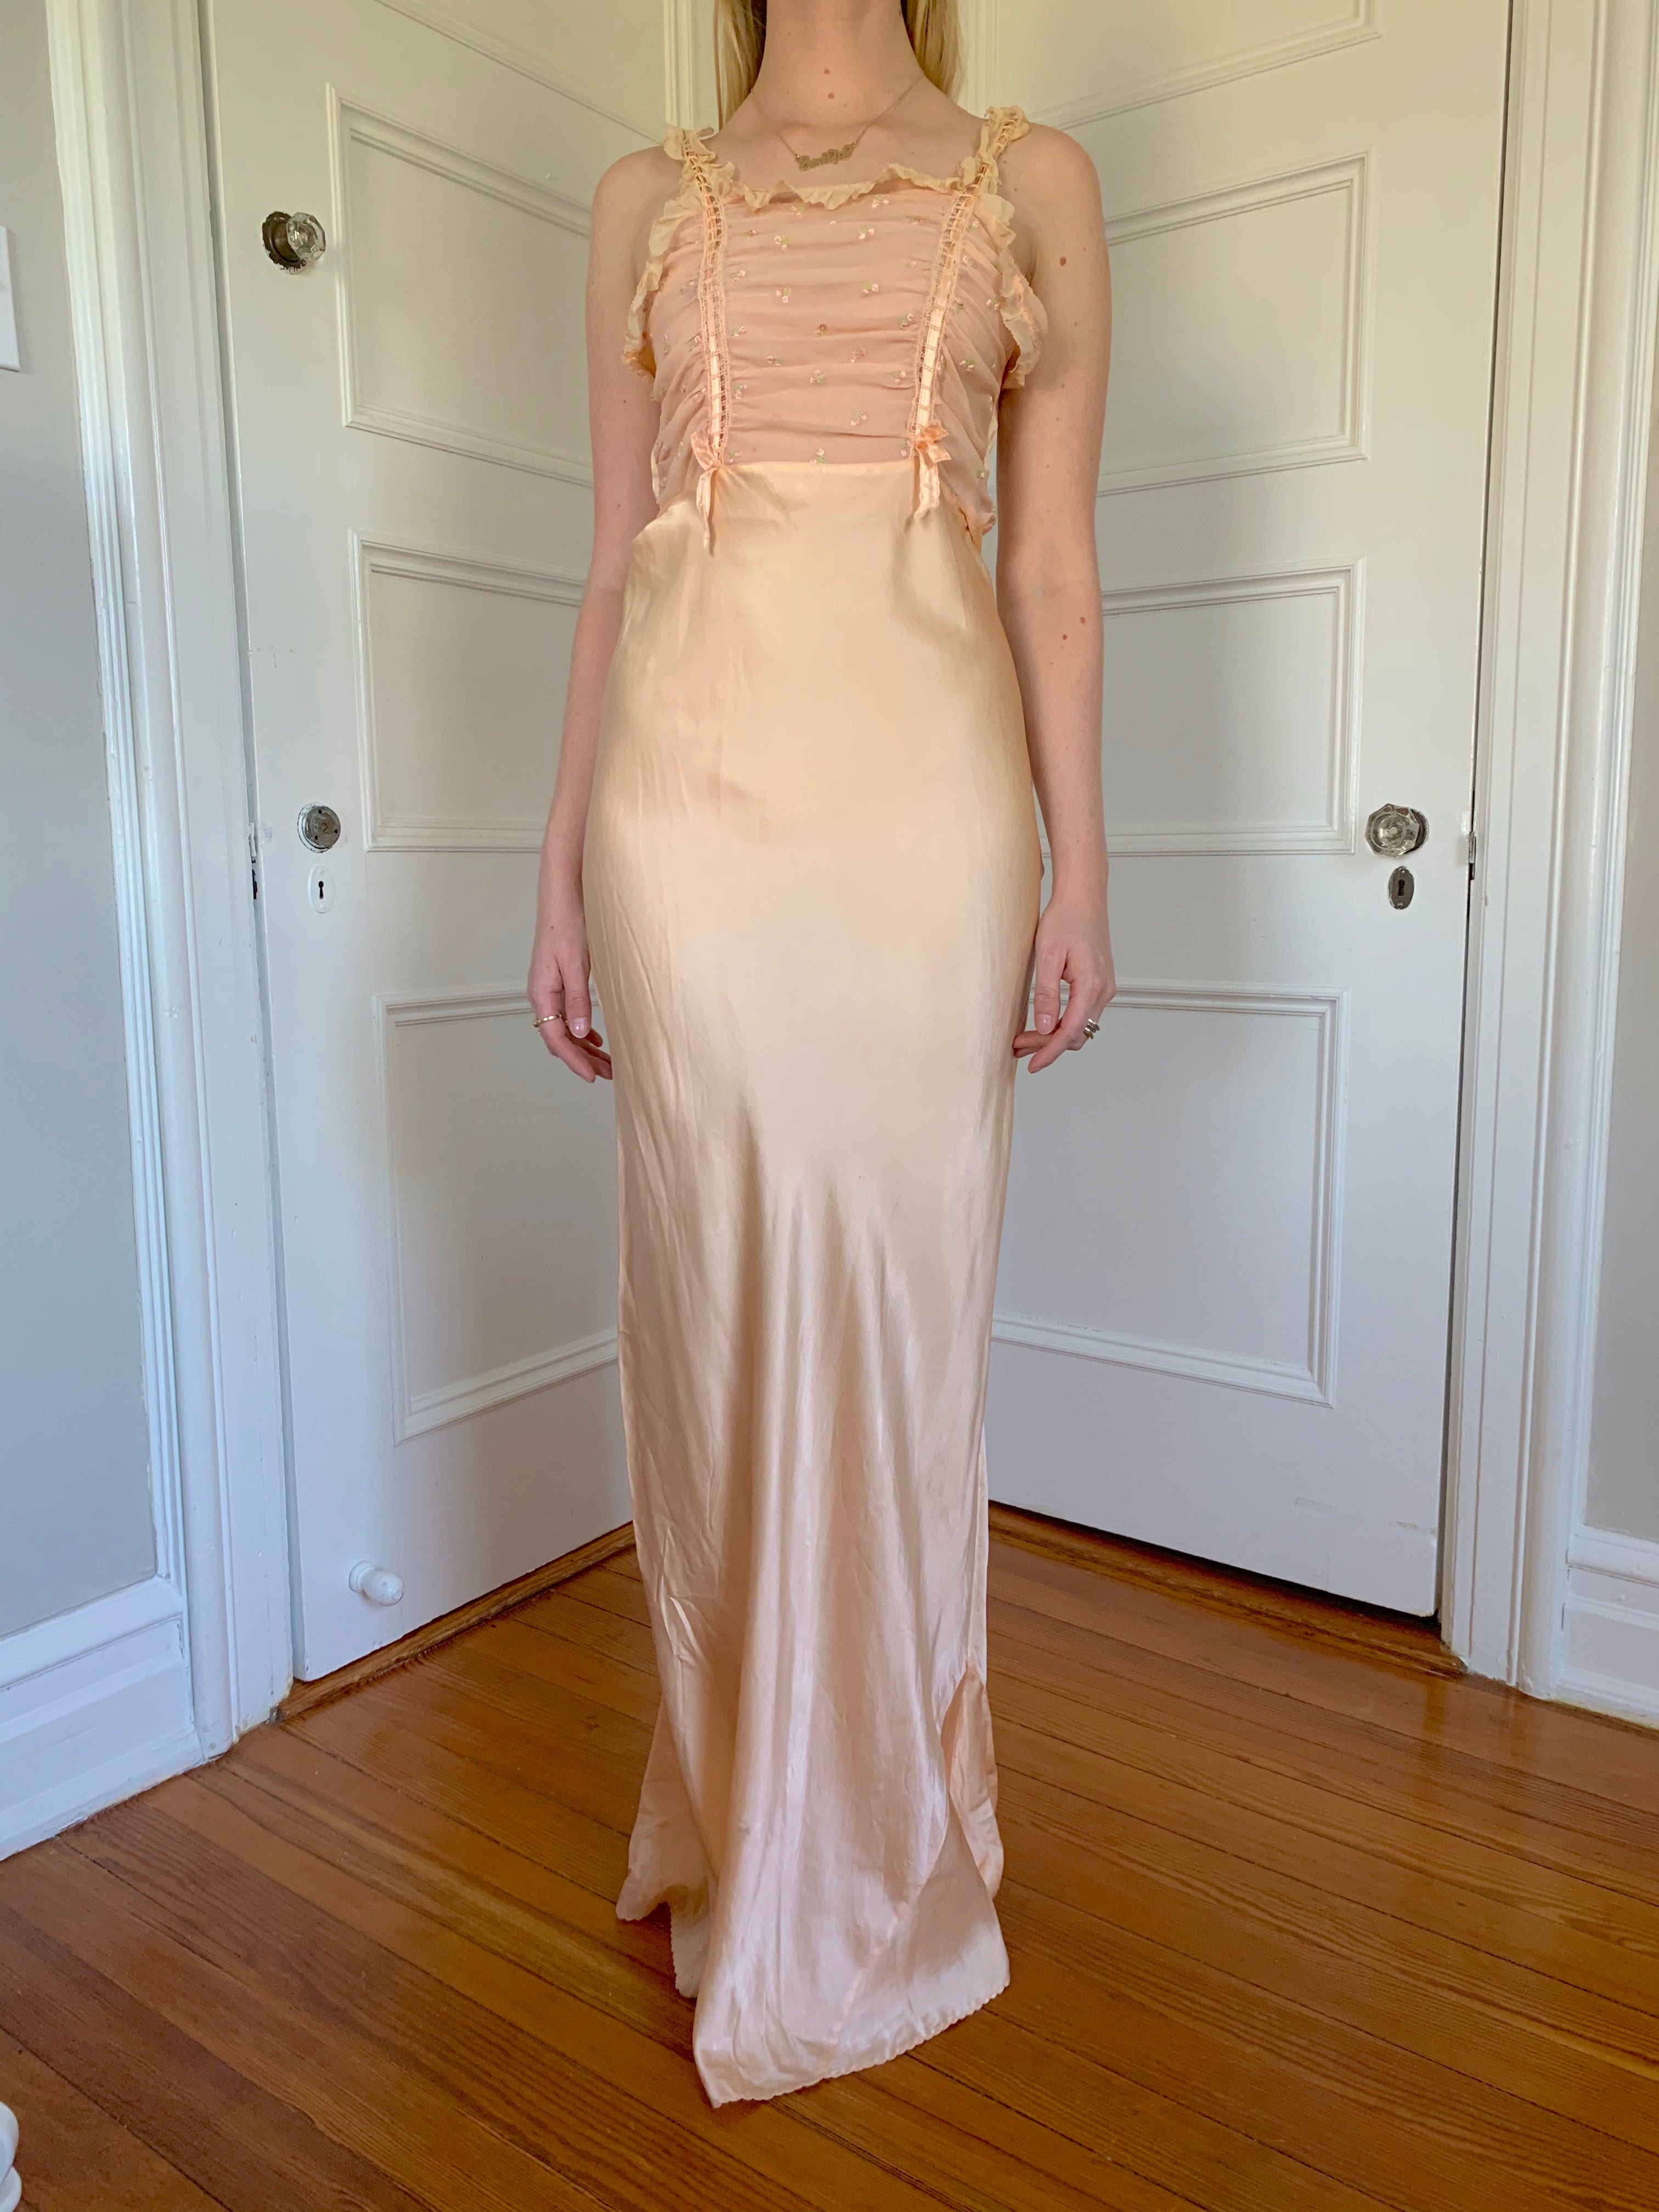 Peach Silk Slip with Chiffon Bust, Ribbons, and Floral Embroidery